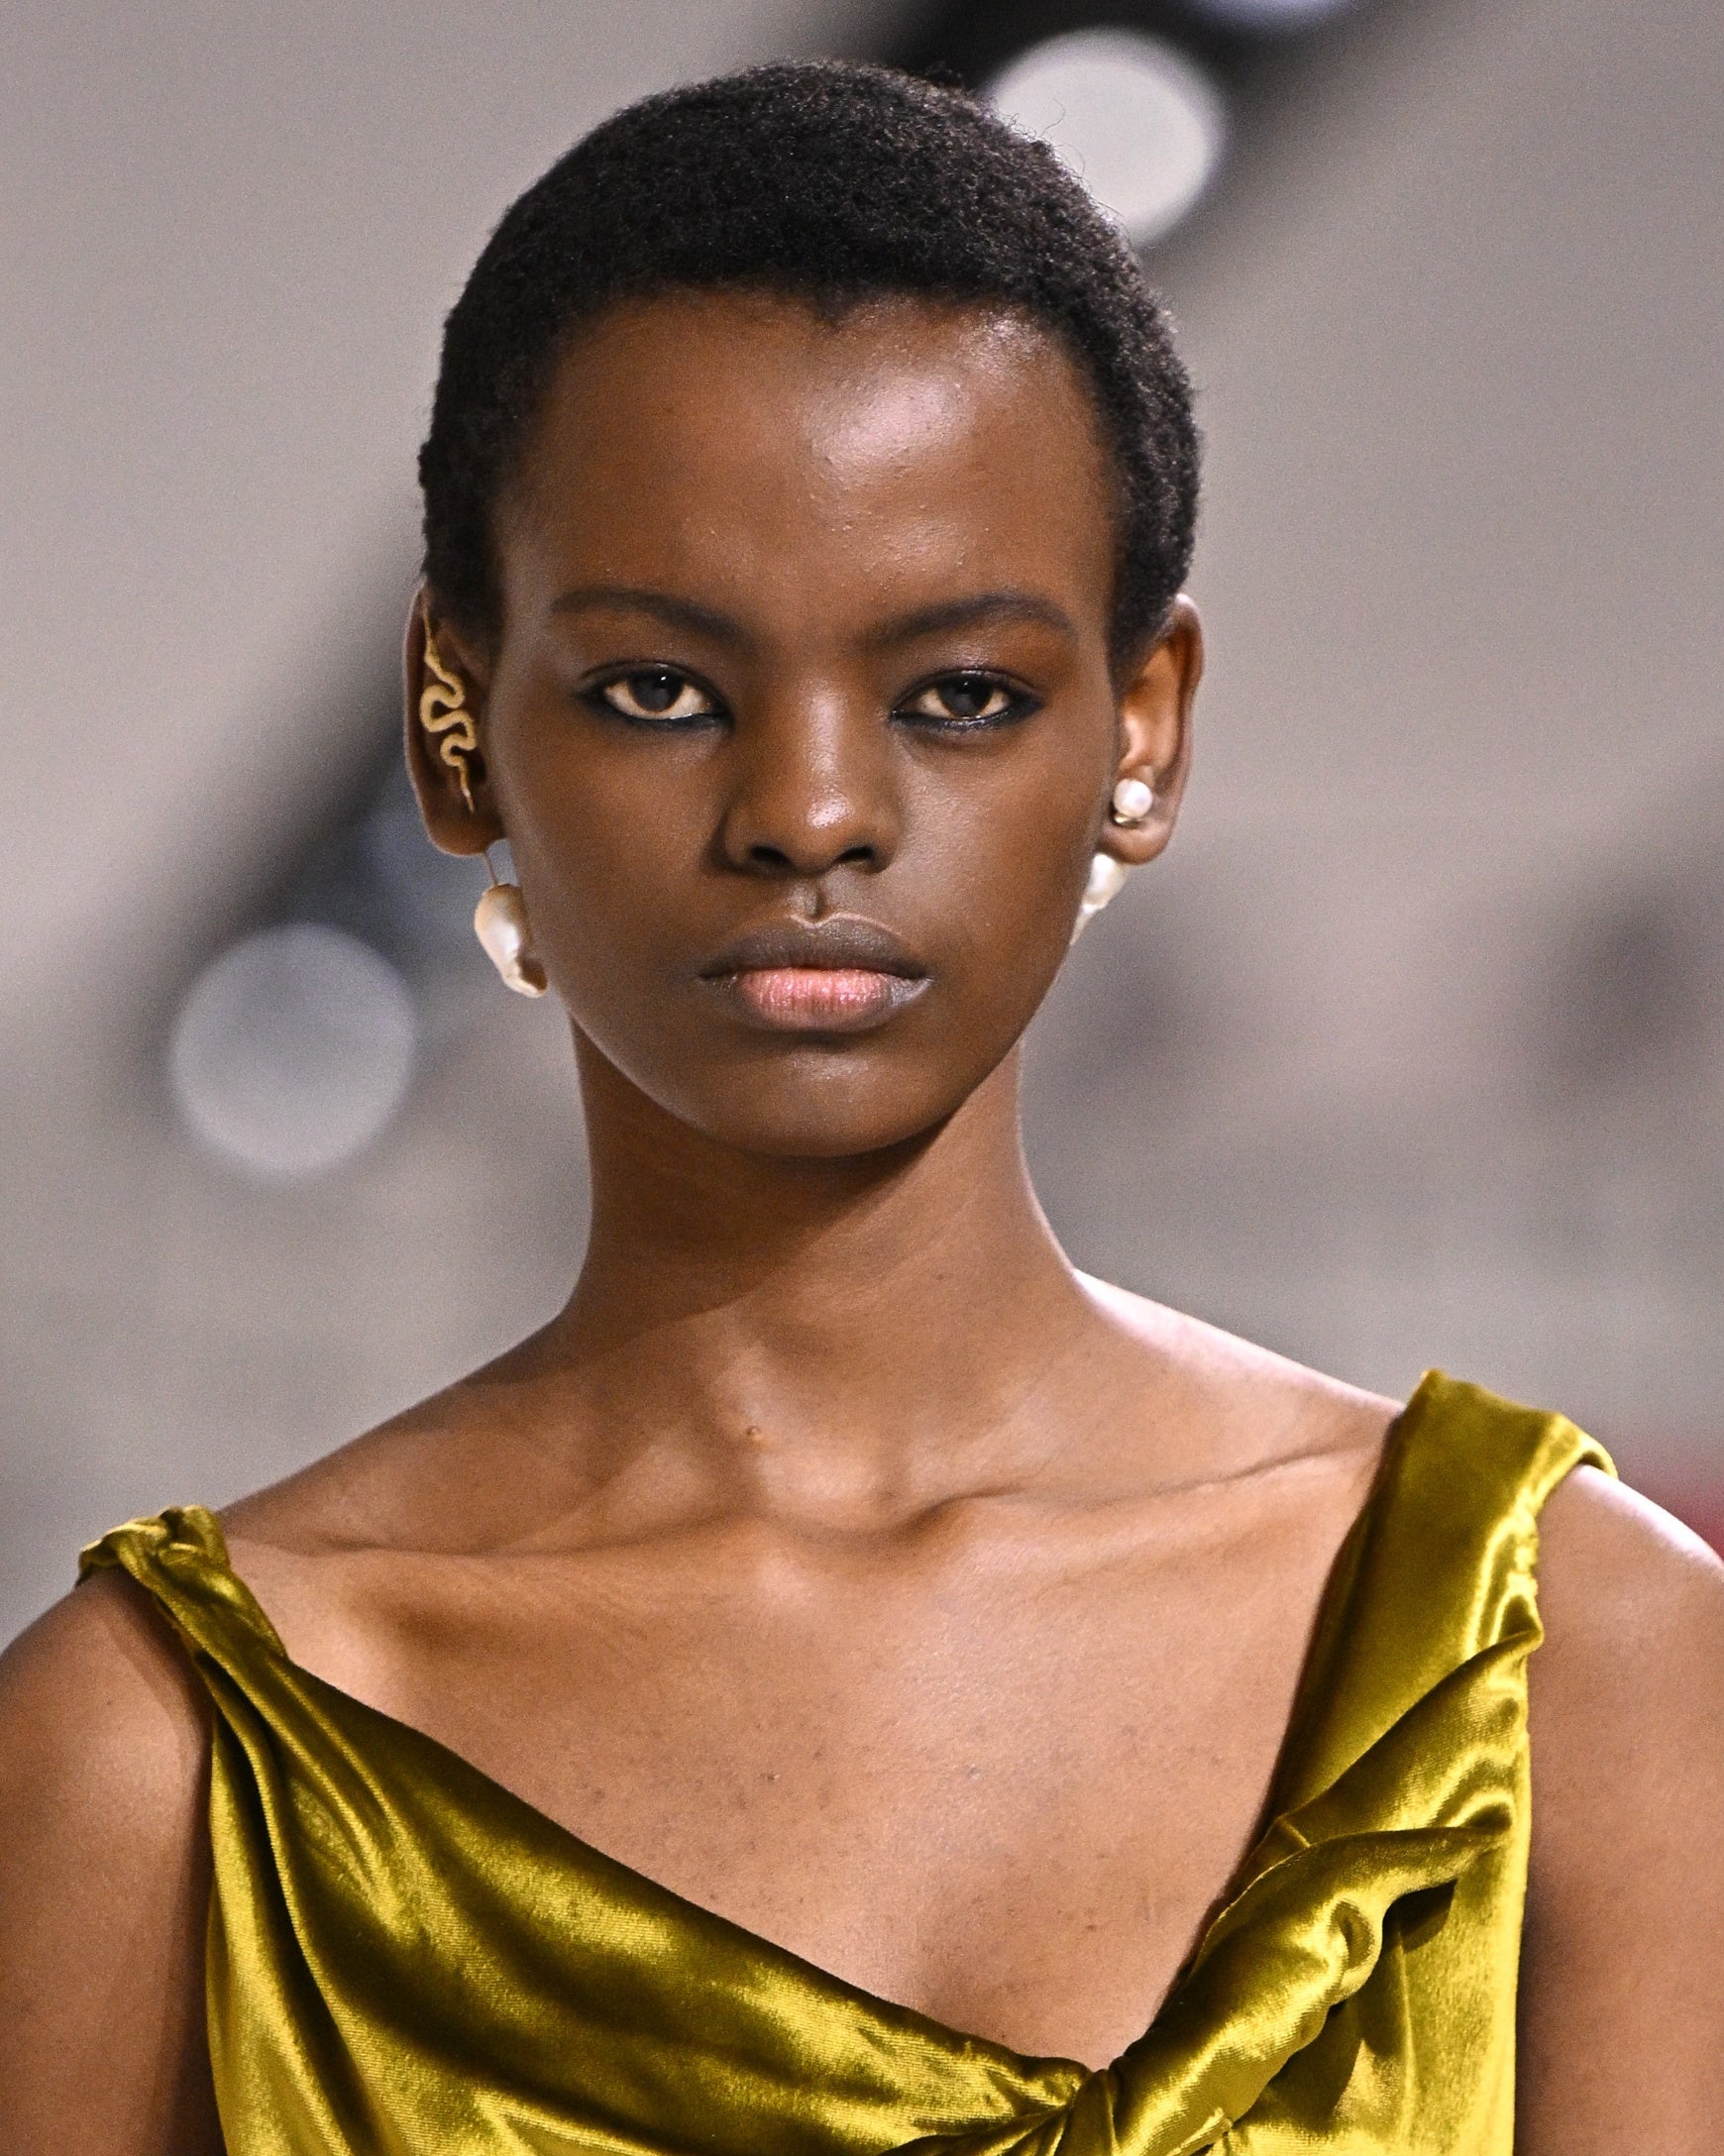 Bows, Buns, and Jewels: The Haute-est Couture Beauty Round-Up